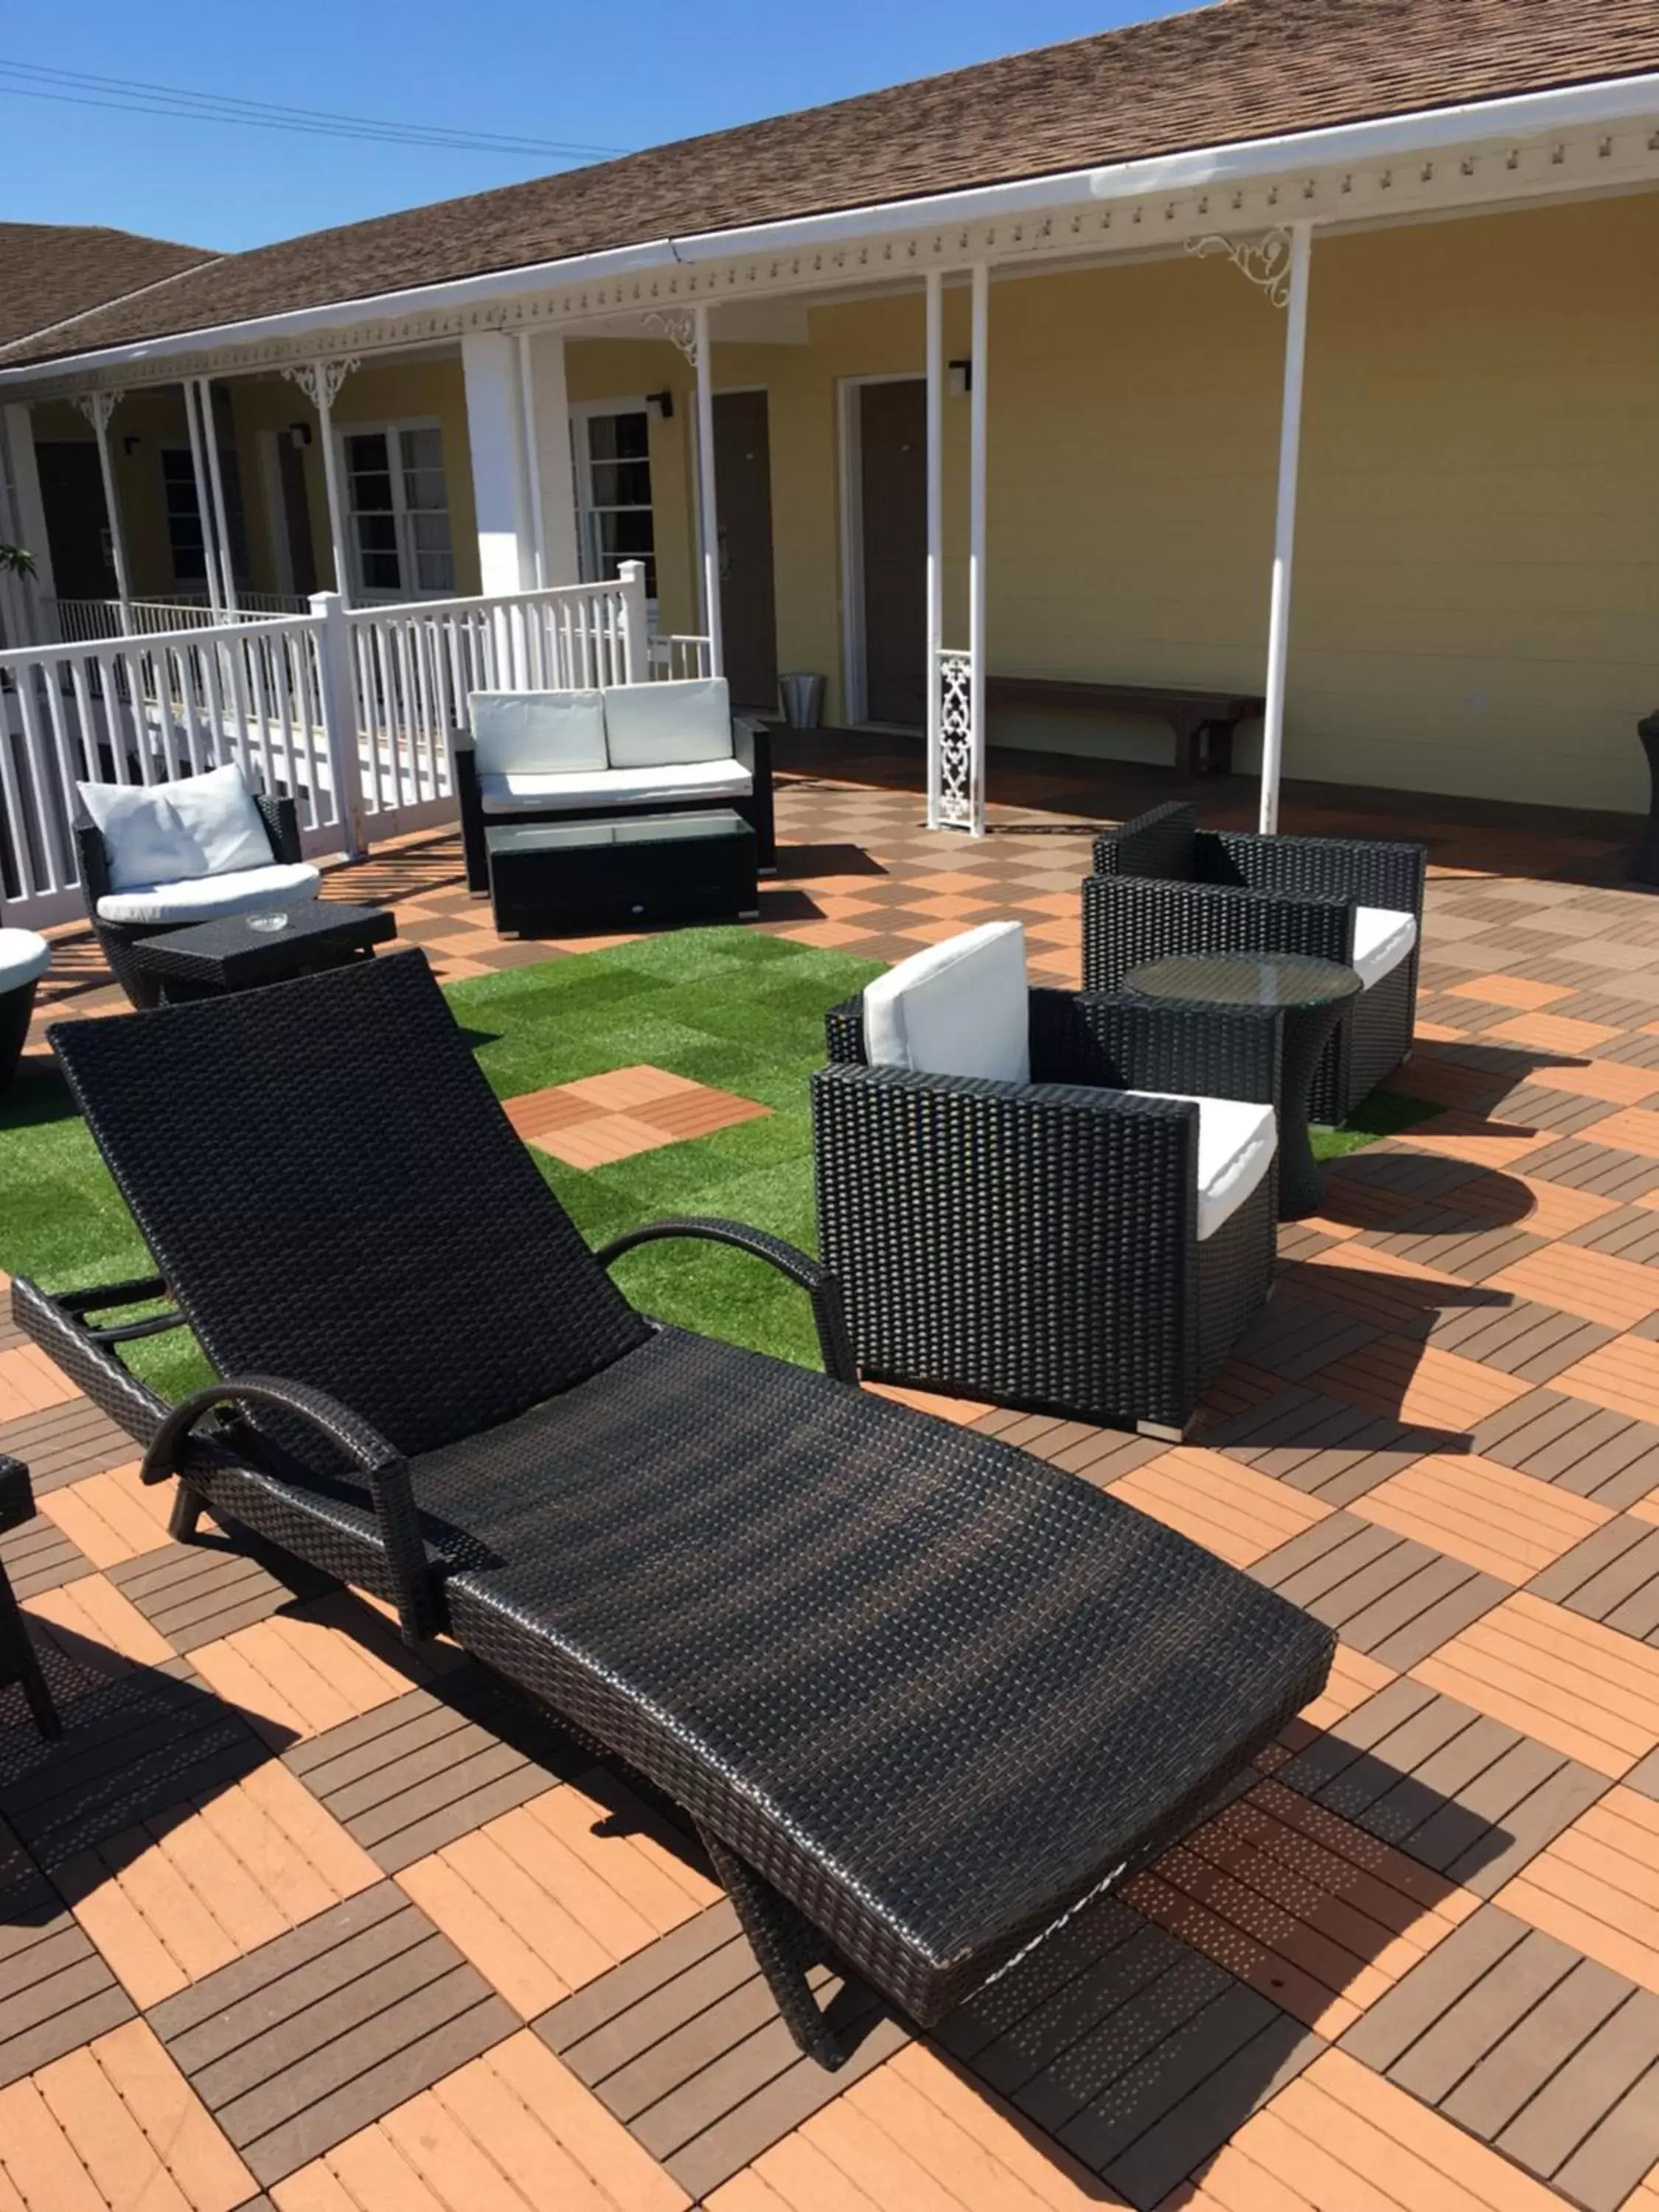 Patio in Historic Waterfront Marion Motor Lodge in downtown St Augustine